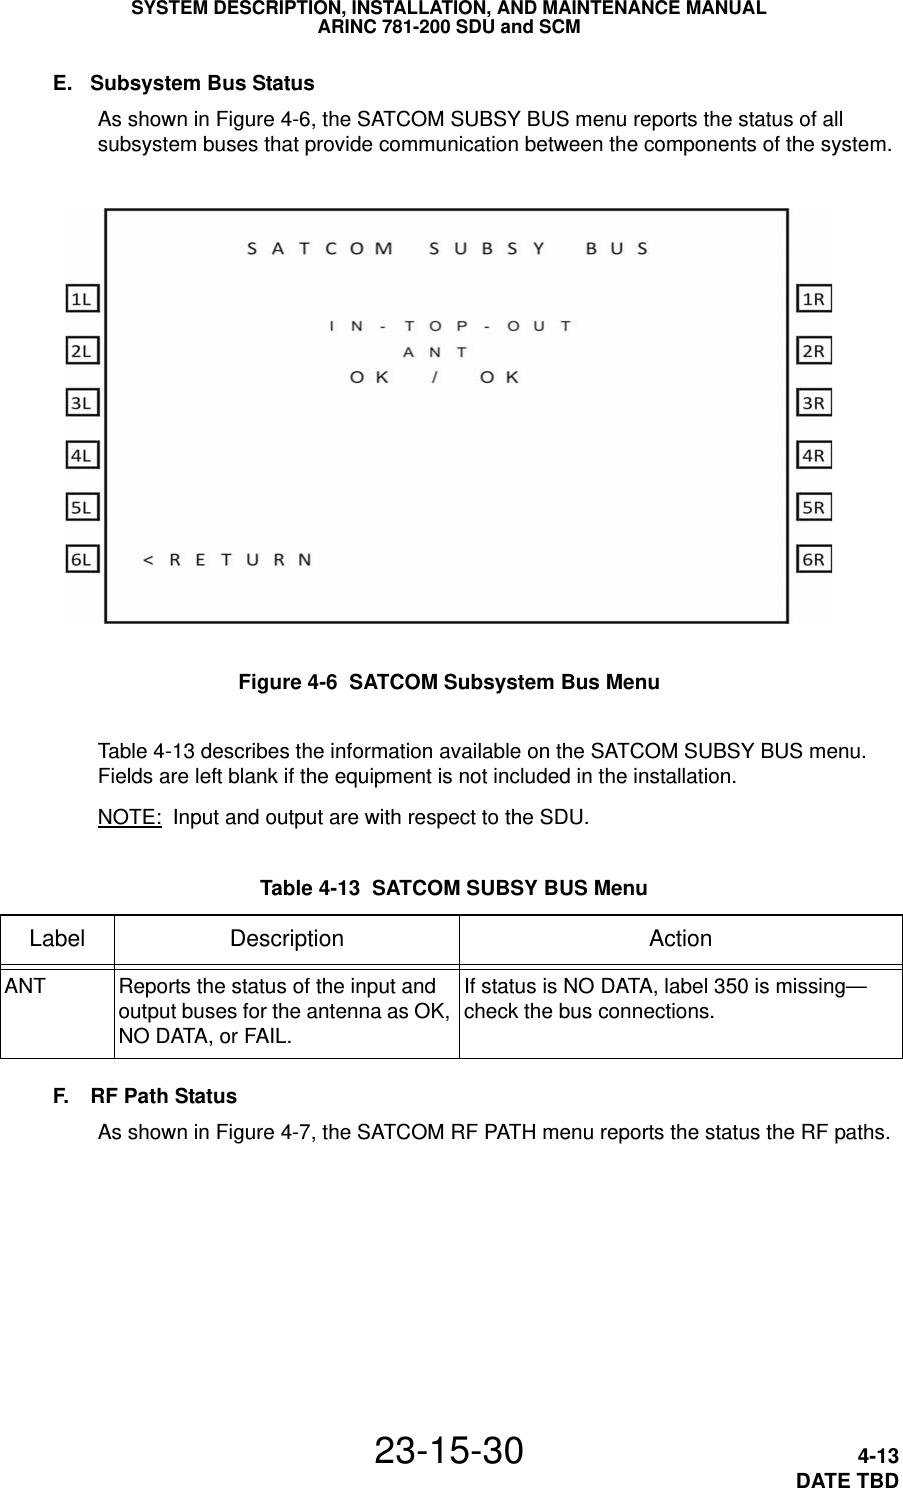 SYSTEM DESCRIPTION, INSTALLATION, AND MAINTENANCE MANUALARINC 781-200 SDU and SCM23-15-30 4-13DATE TBDE. Subsystem Bus StatusAs shown in Figure 4-6, the SATCOM SUBSY BUS menu reports the status of all subsystem buses that provide communication between the components of the system.Figure 4-6  SATCOM Subsystem Bus MenuTable 4-13 describes the information available on the SATCOM SUBSY BUS menu. Fields are left blank if the equipment is not included in the installation.NOTE: Input and output are with respect to the SDU.F. RF Path StatusAs shown in Figure 4-7, the SATCOM RF PATH menu reports the status the RF paths. Table 4-13  SATCOM SUBSY BUS Menu Label Description ActionANT Reports the status of the input and output buses for the antenna as OK, NO DATA, or FAIL.If status is NO DATA, label 350 is missing—check the bus connections.